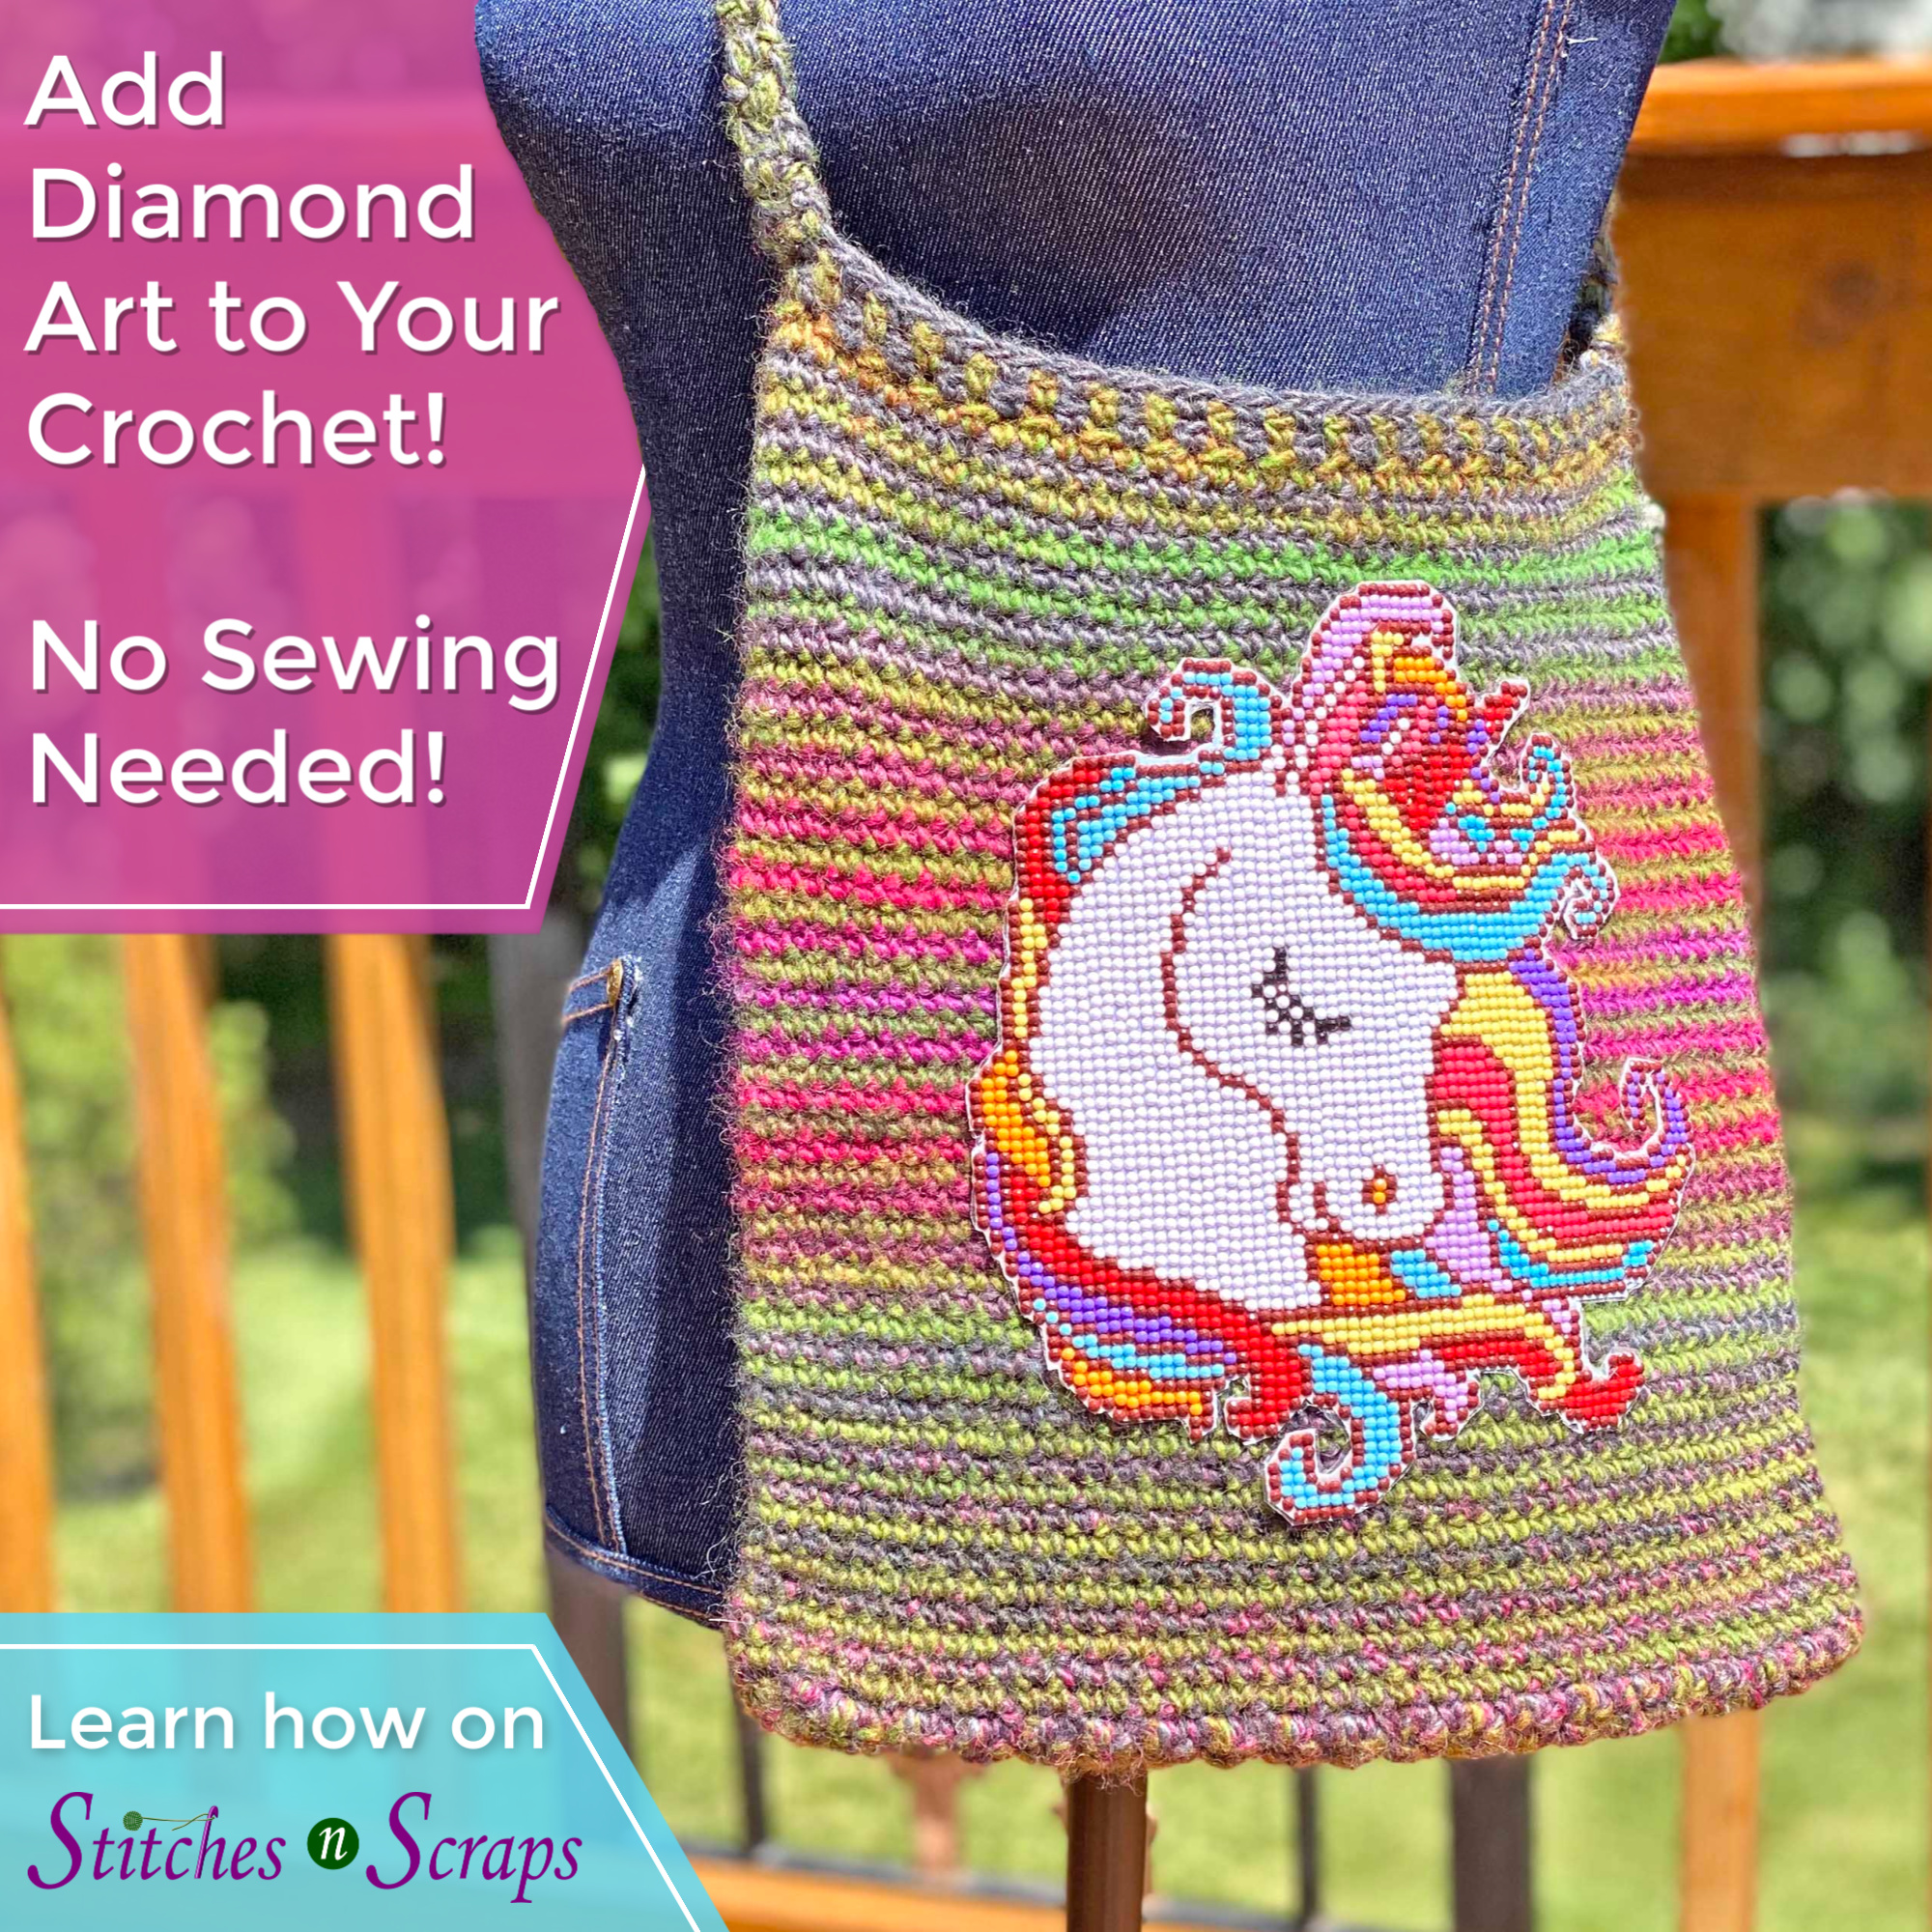 Mount Diamond Art to Your Crochet! Image shows a unicorn Diamond Art project attached to a crocheted bag.